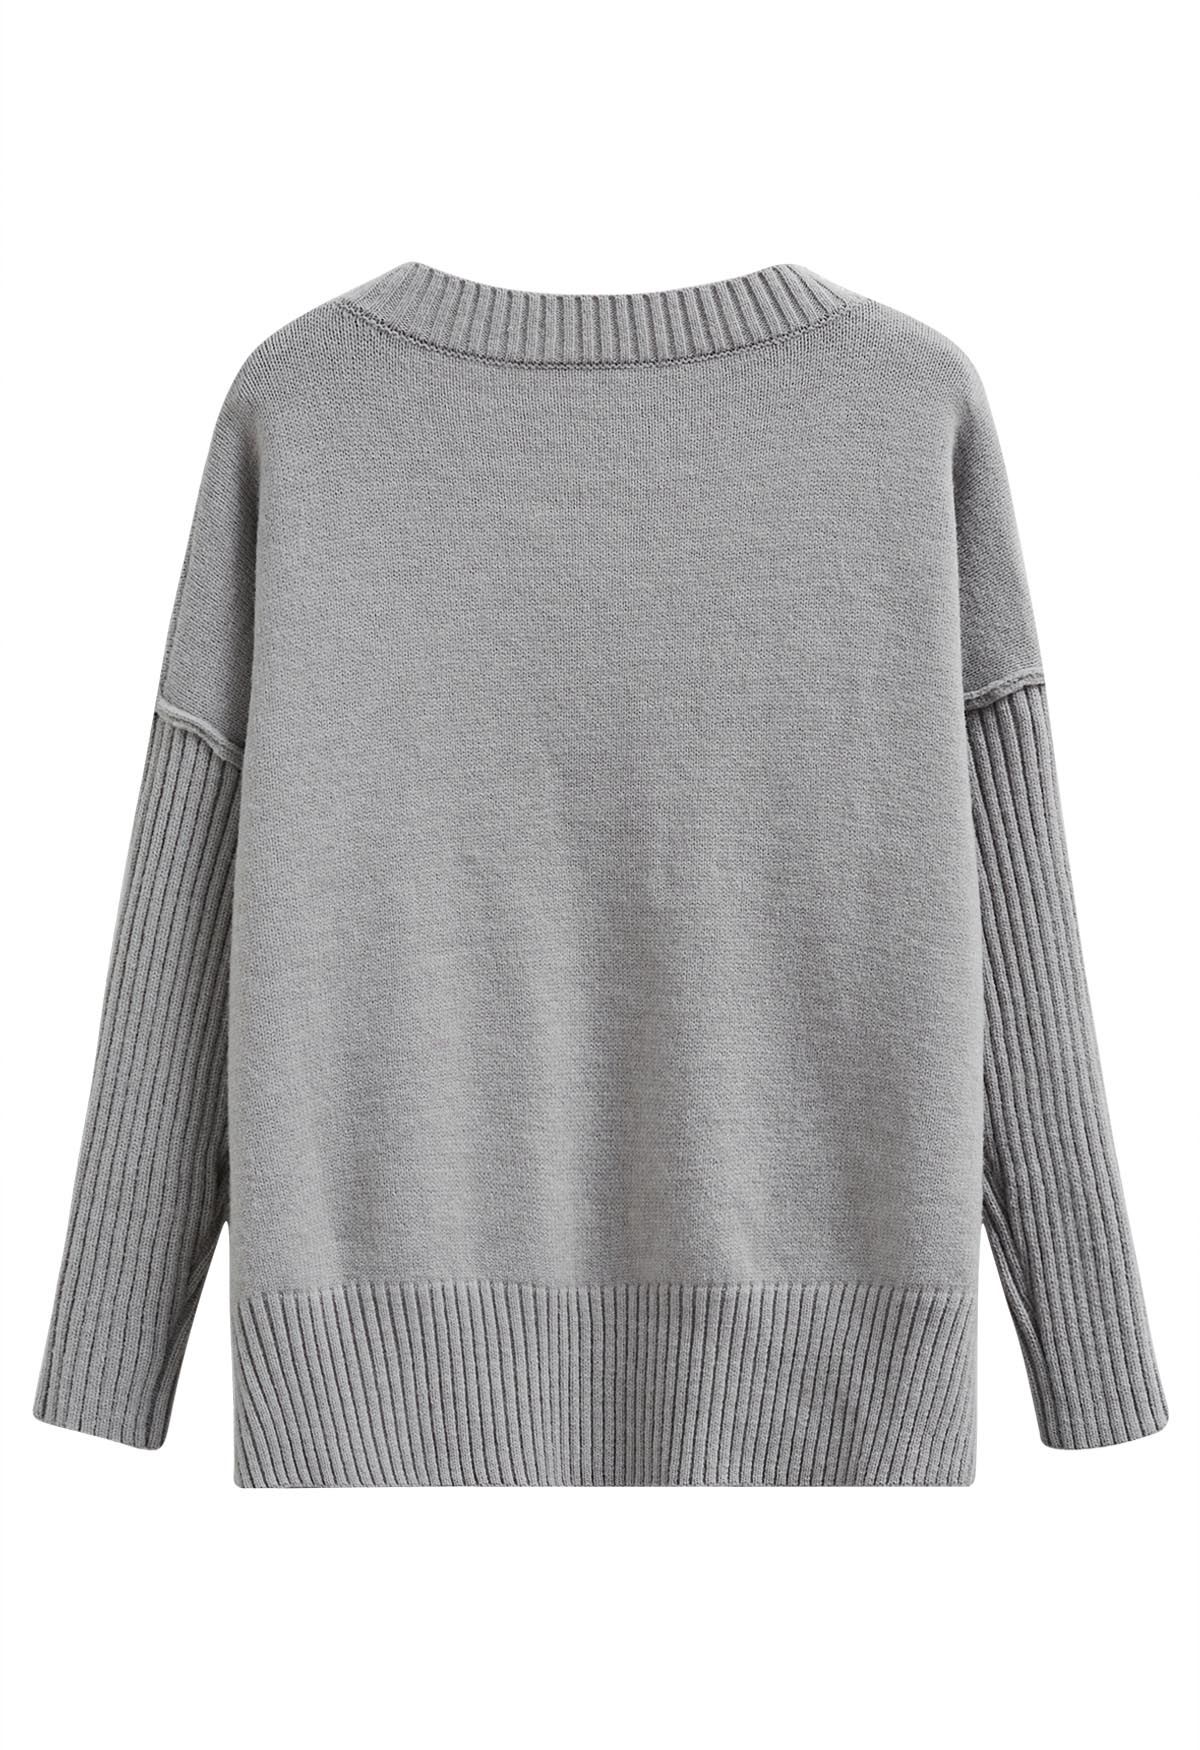 Dropped Shoulder Side Slit Slouchy Knit Sweater in Grey - Retro, Indie ...